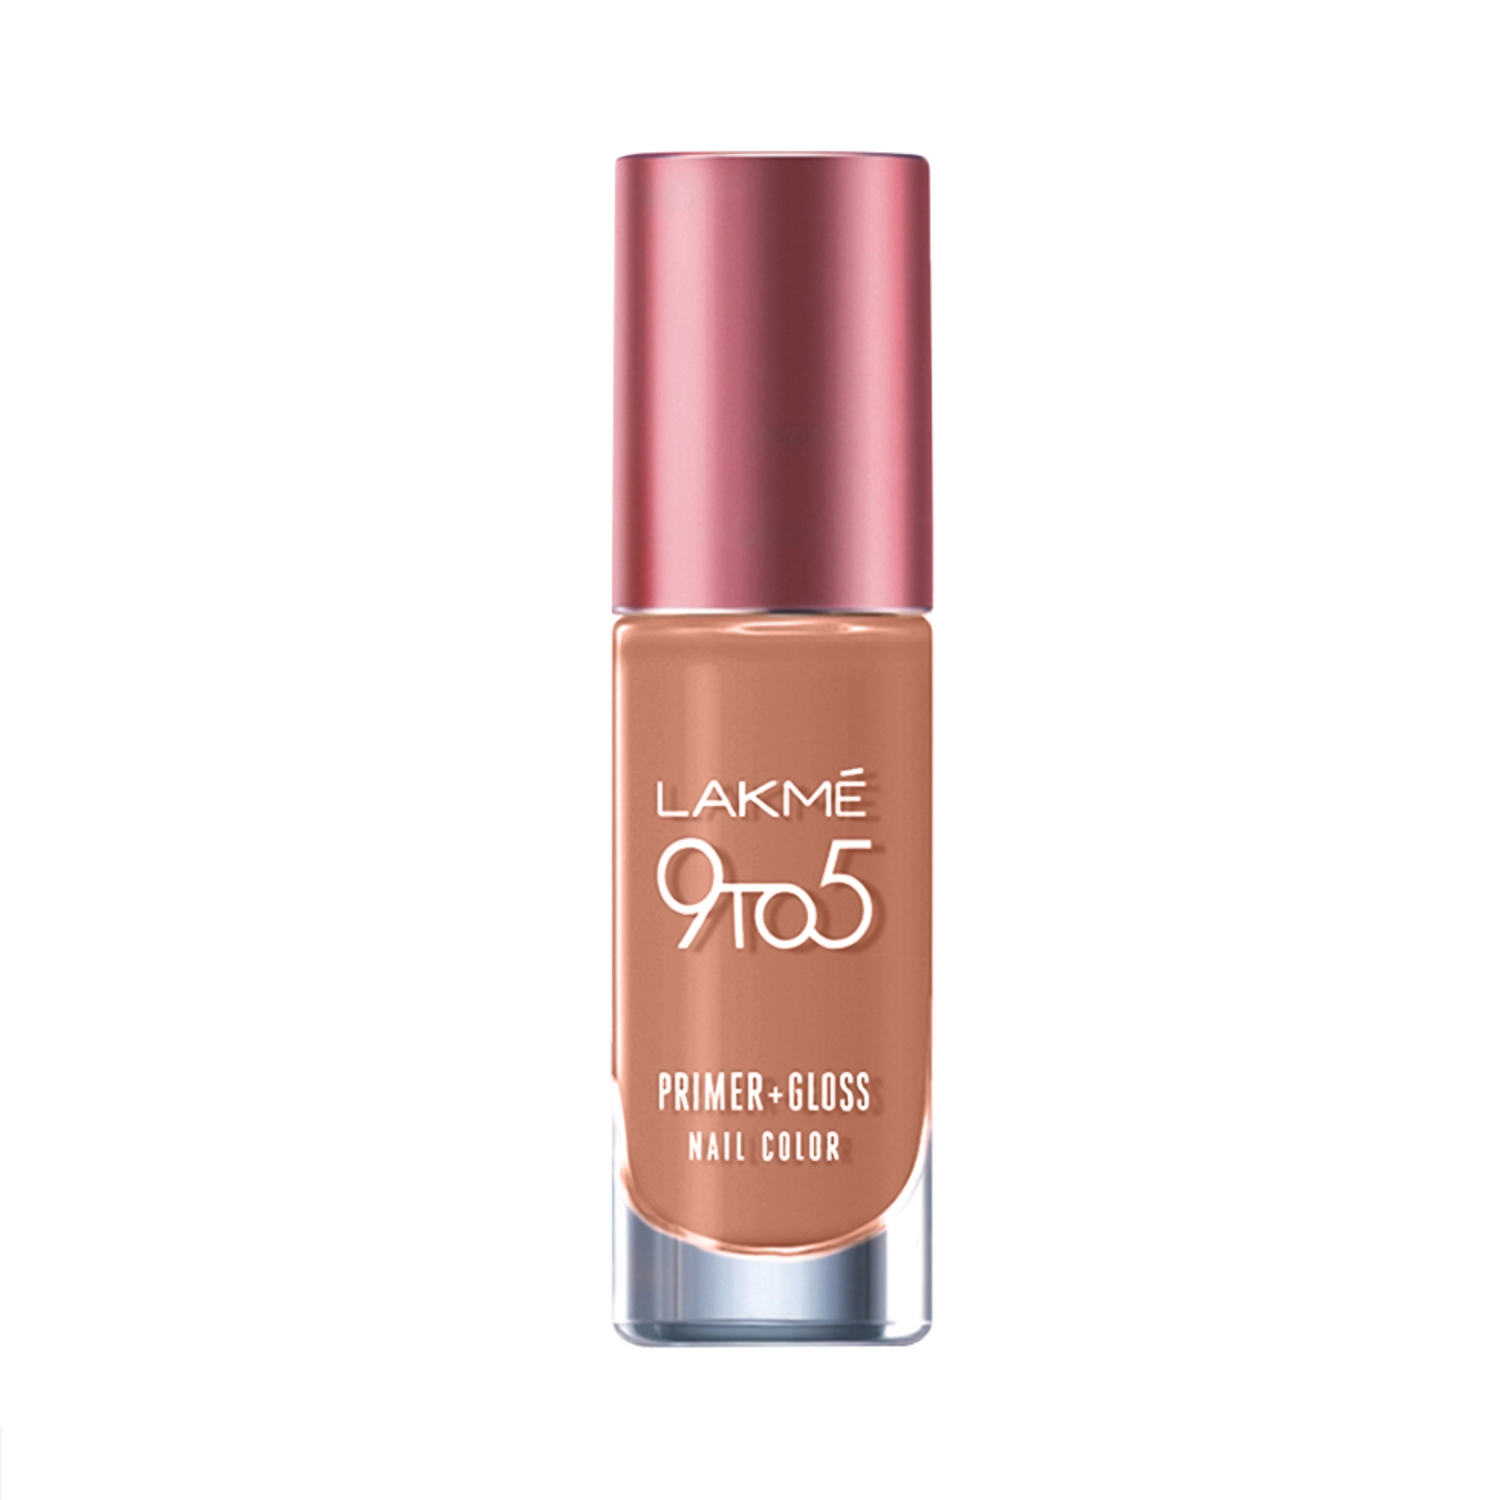 Lakme | Lakme 9 To 5 Primer + Gloss Nail Color - Staycation Nude (6ml)